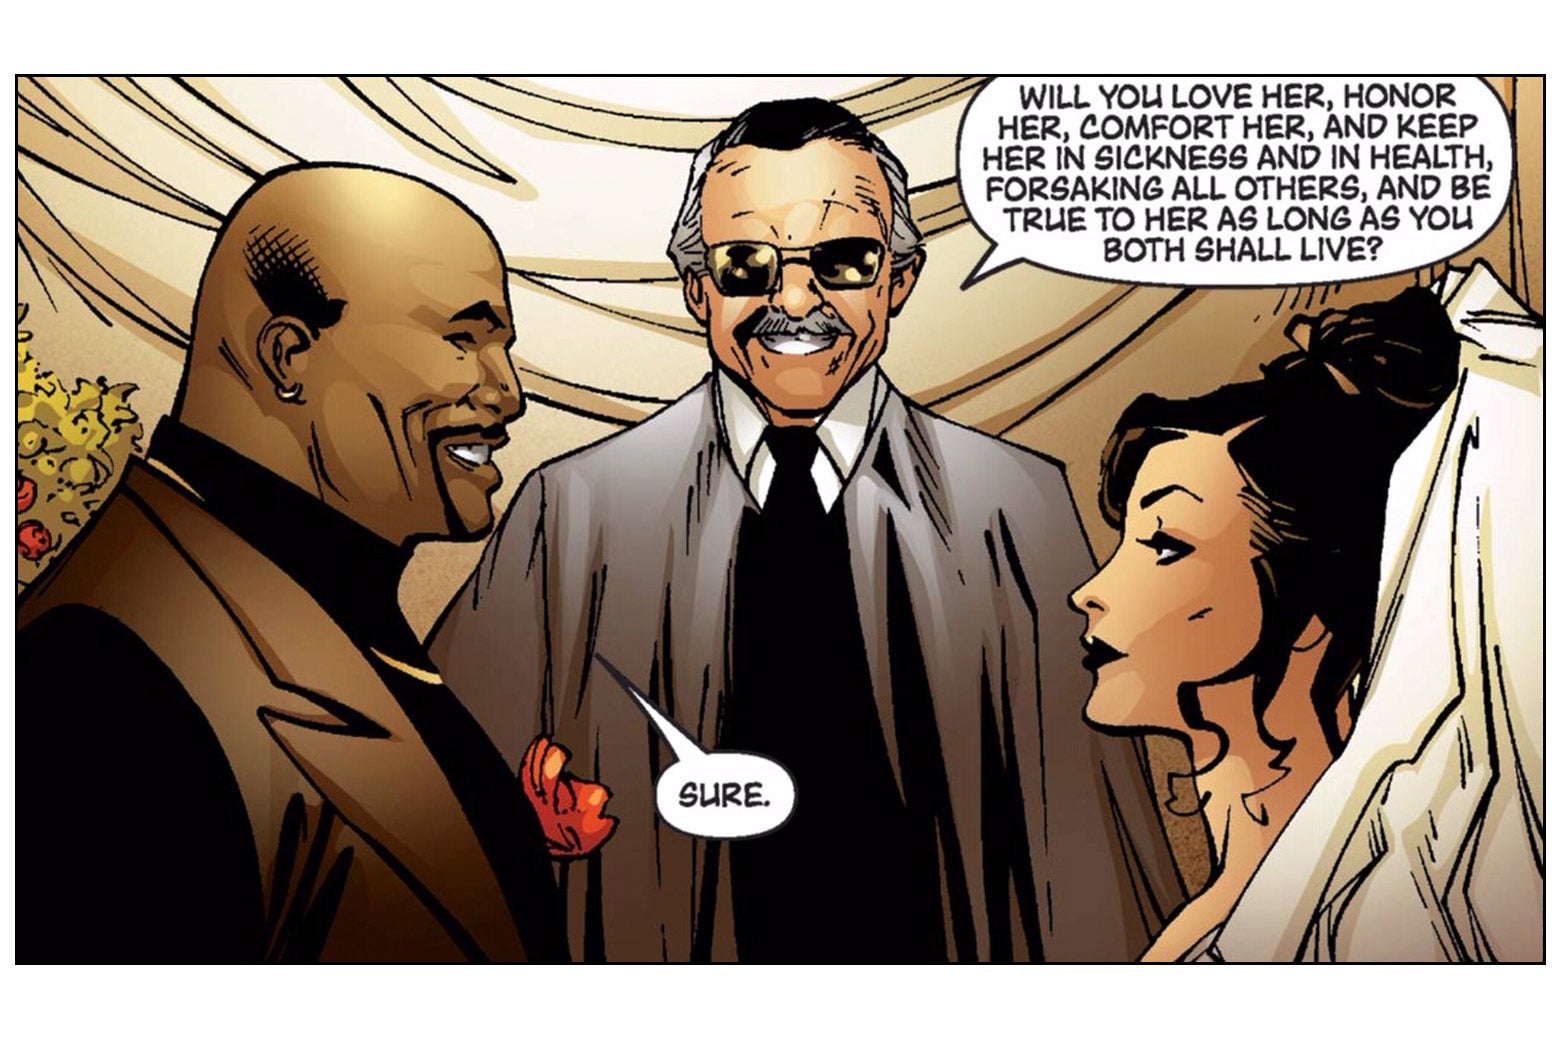 Stan Lee officiates the wedding of Luke Cage and Jessica Jones, smiling.